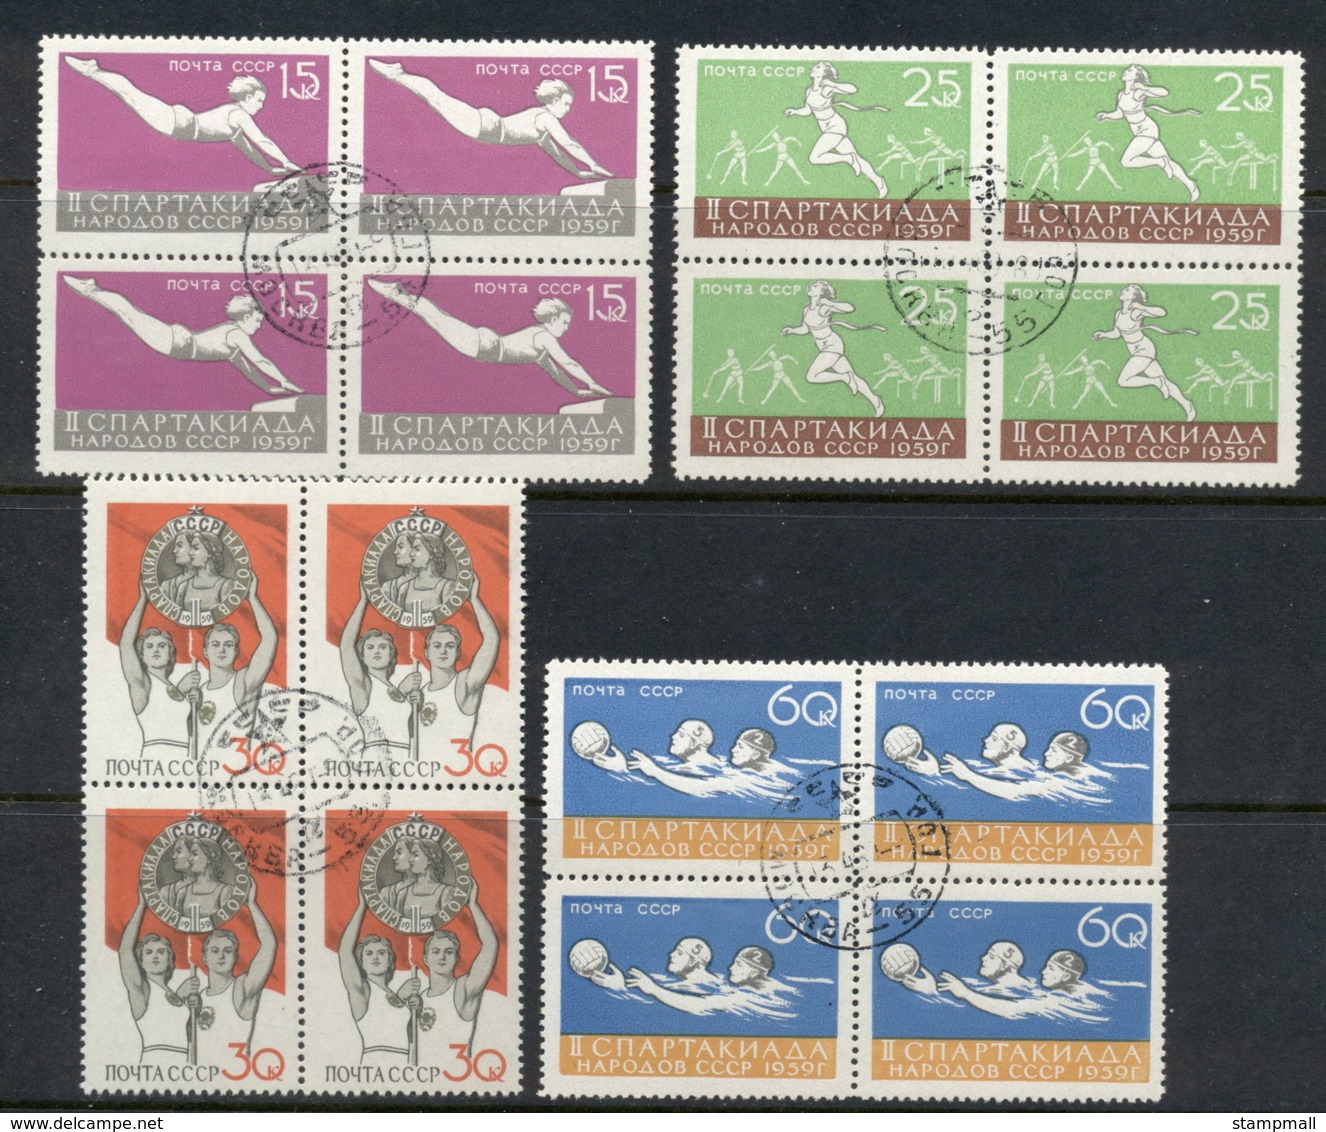 Russia 1959 Spartakist Sports Blk4 CTO - Used Stamps